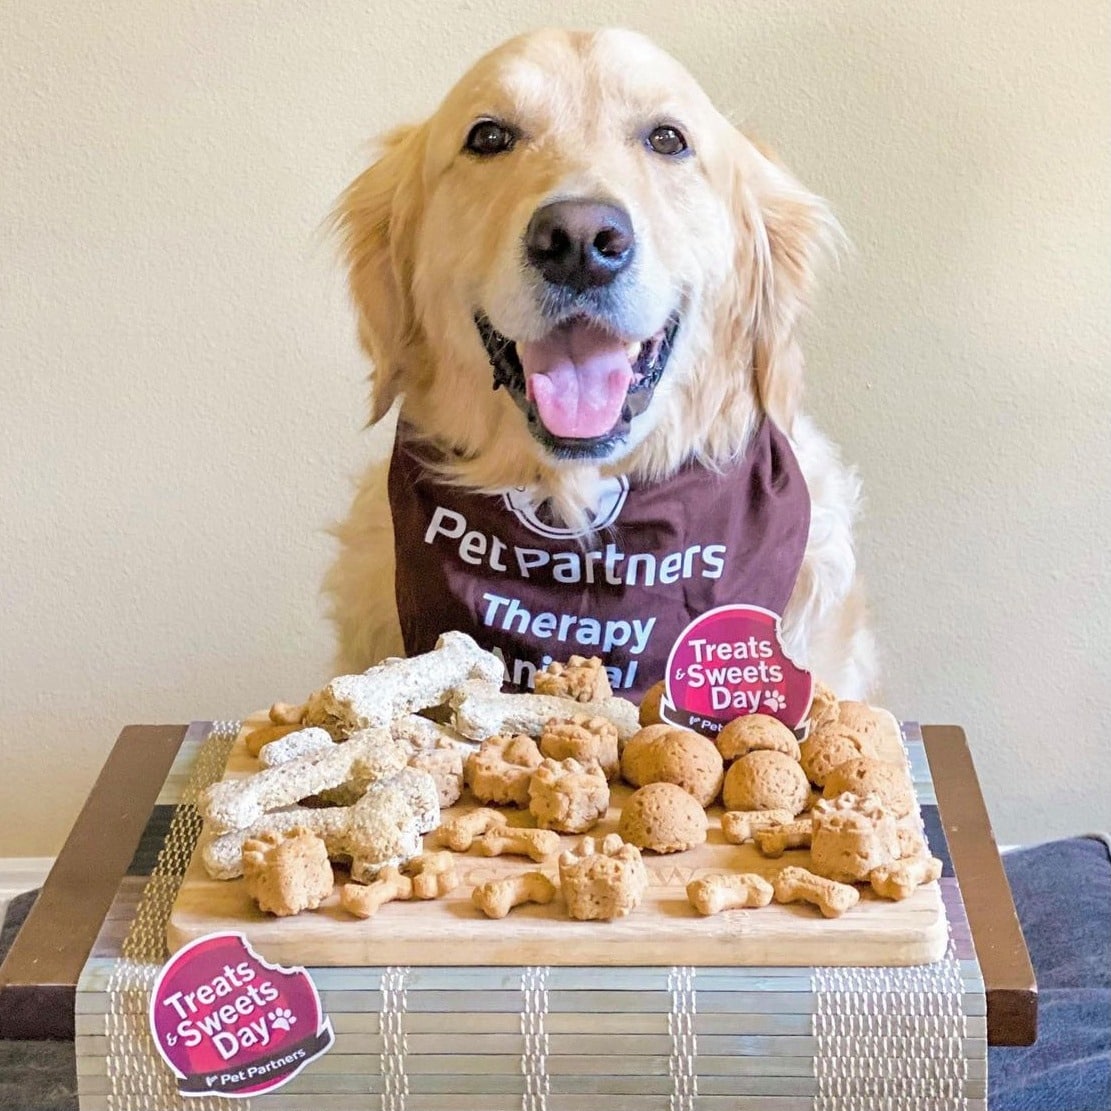 A golden retriever therapy dog wearing a Pet Partners bandana poses behind a box full of treats. The box is decorated with Treats & Sweets Day stickers.